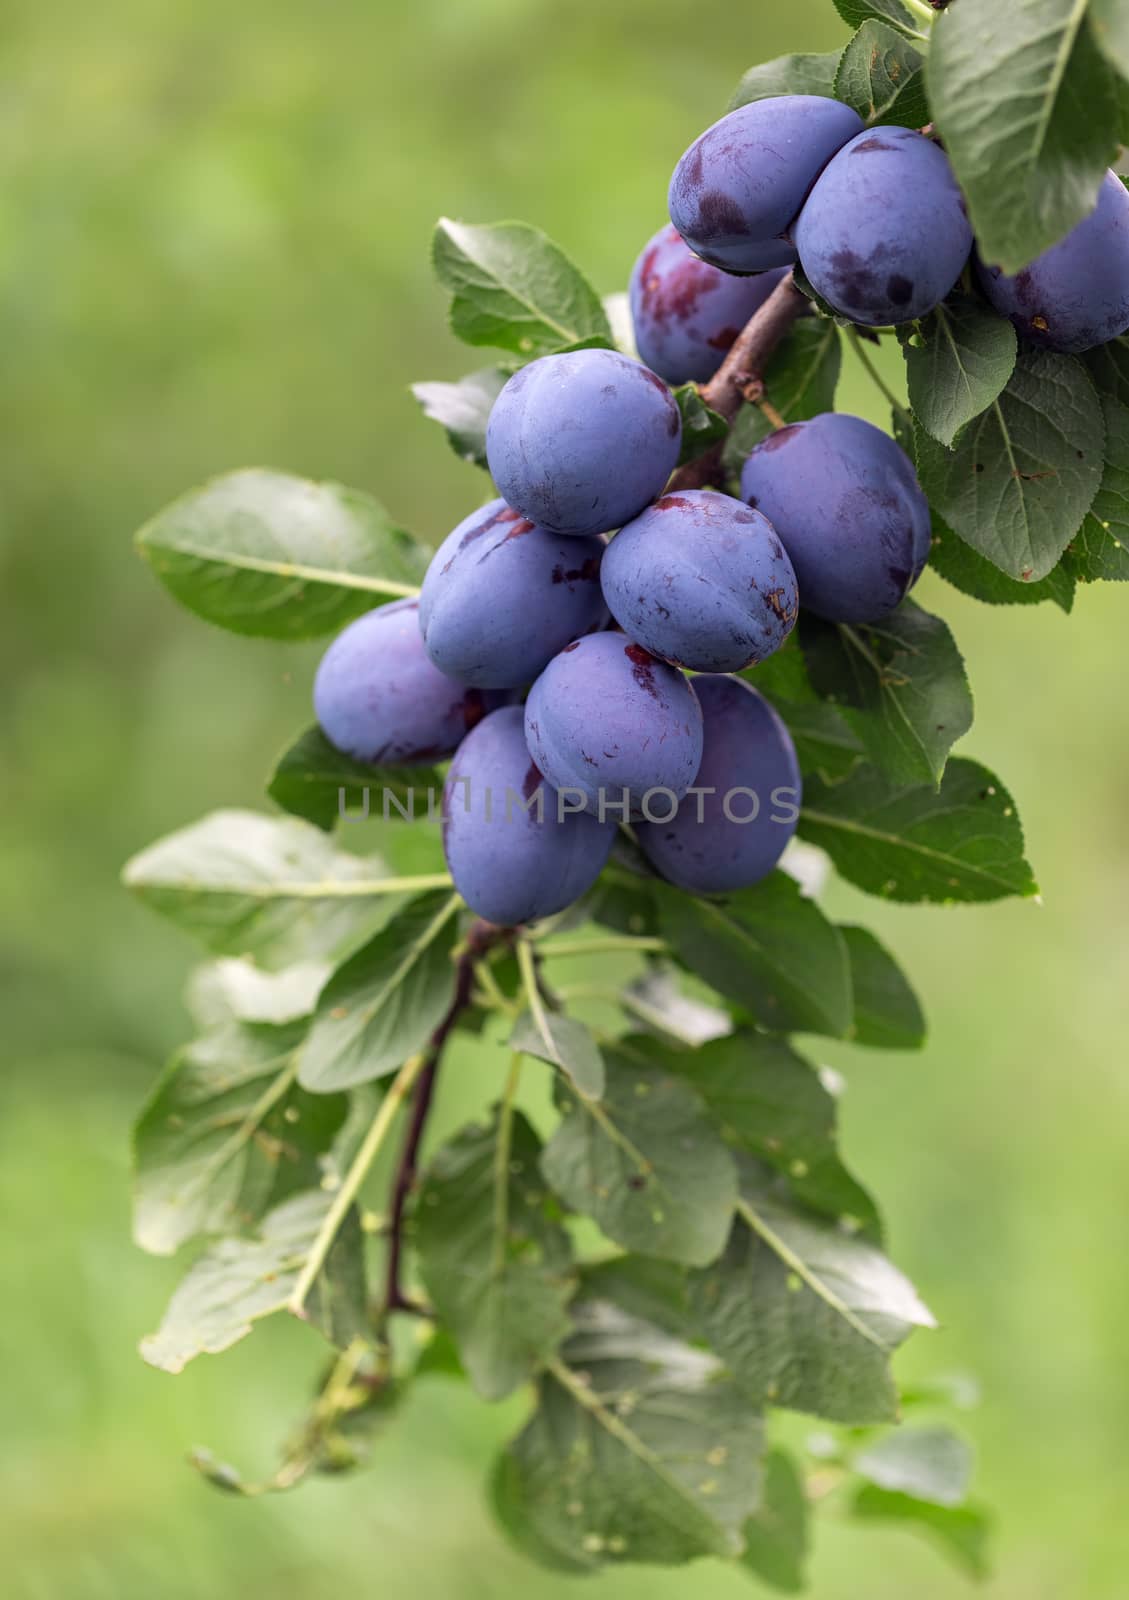 Tree Branch Full of ripe Plums by artush